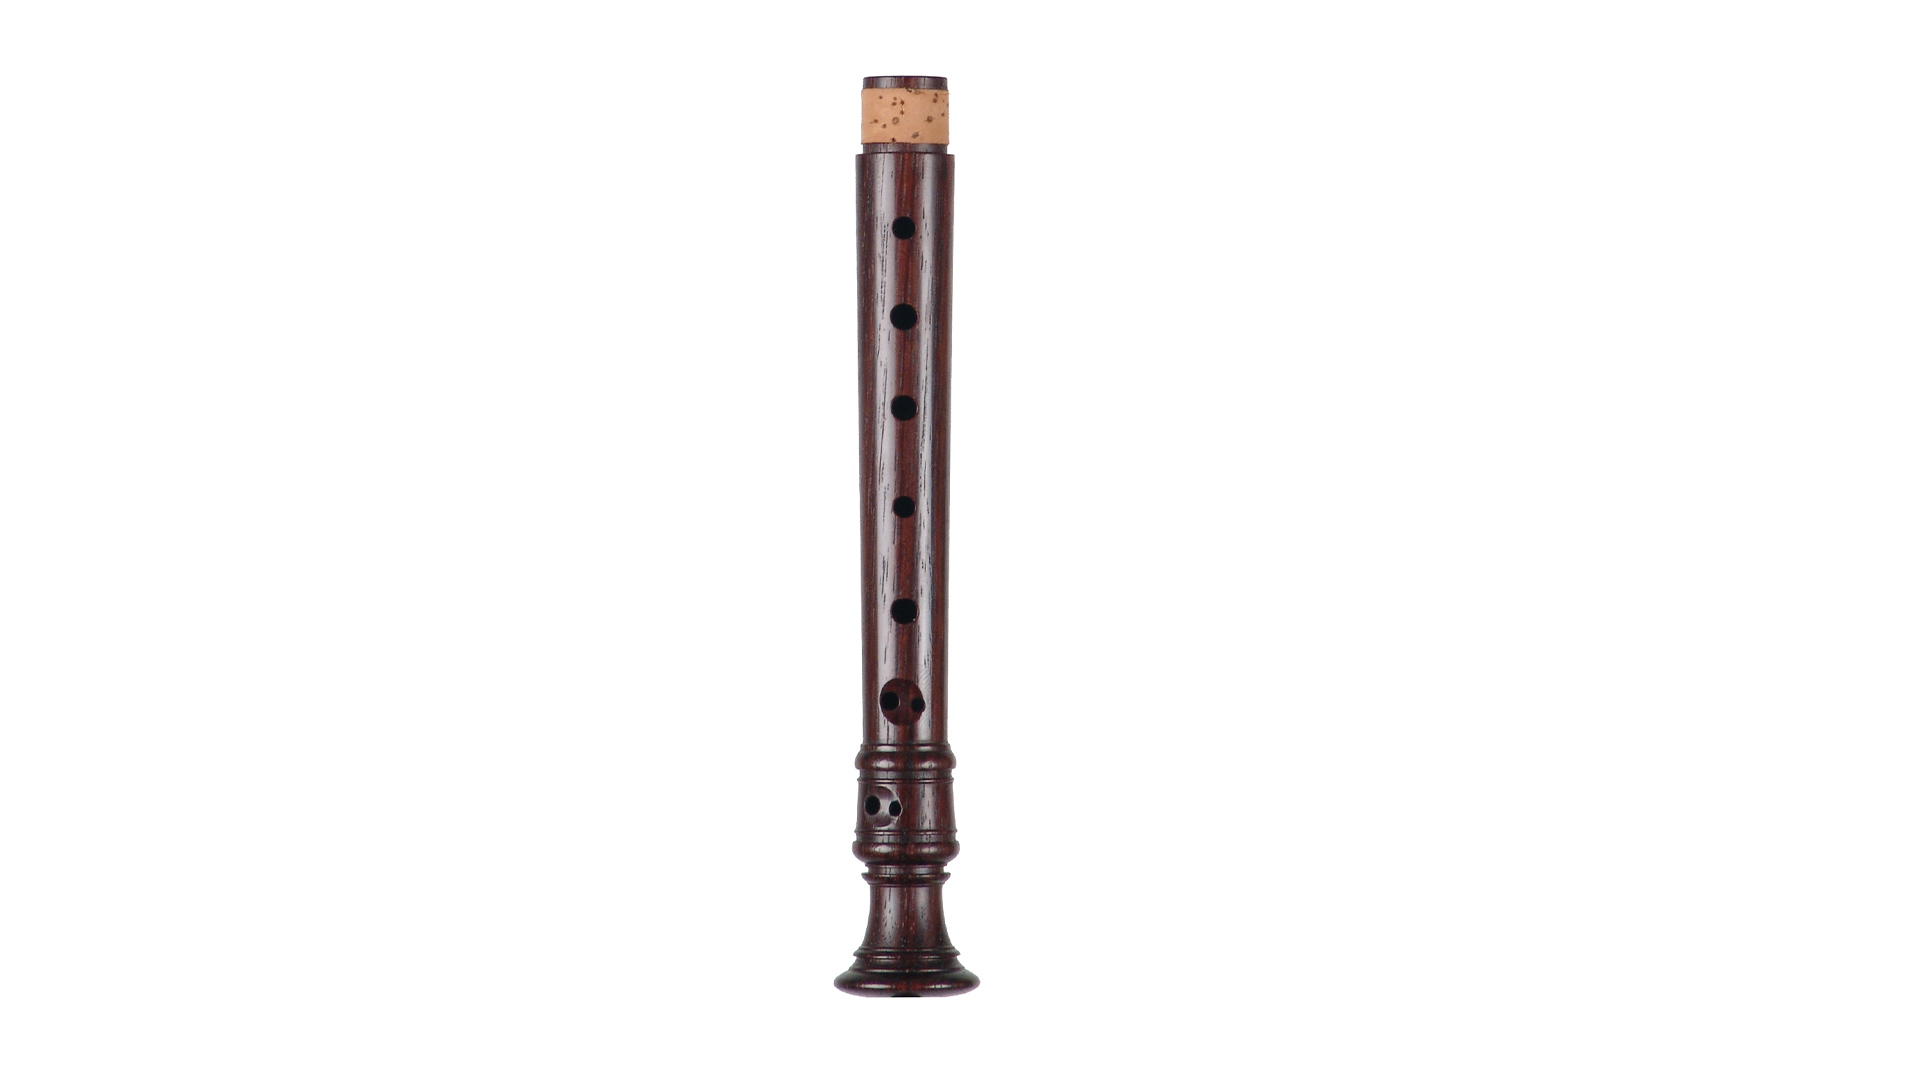 Moeck, "Rottenburgh", sopranino in f'', baroque double hole, rosewood